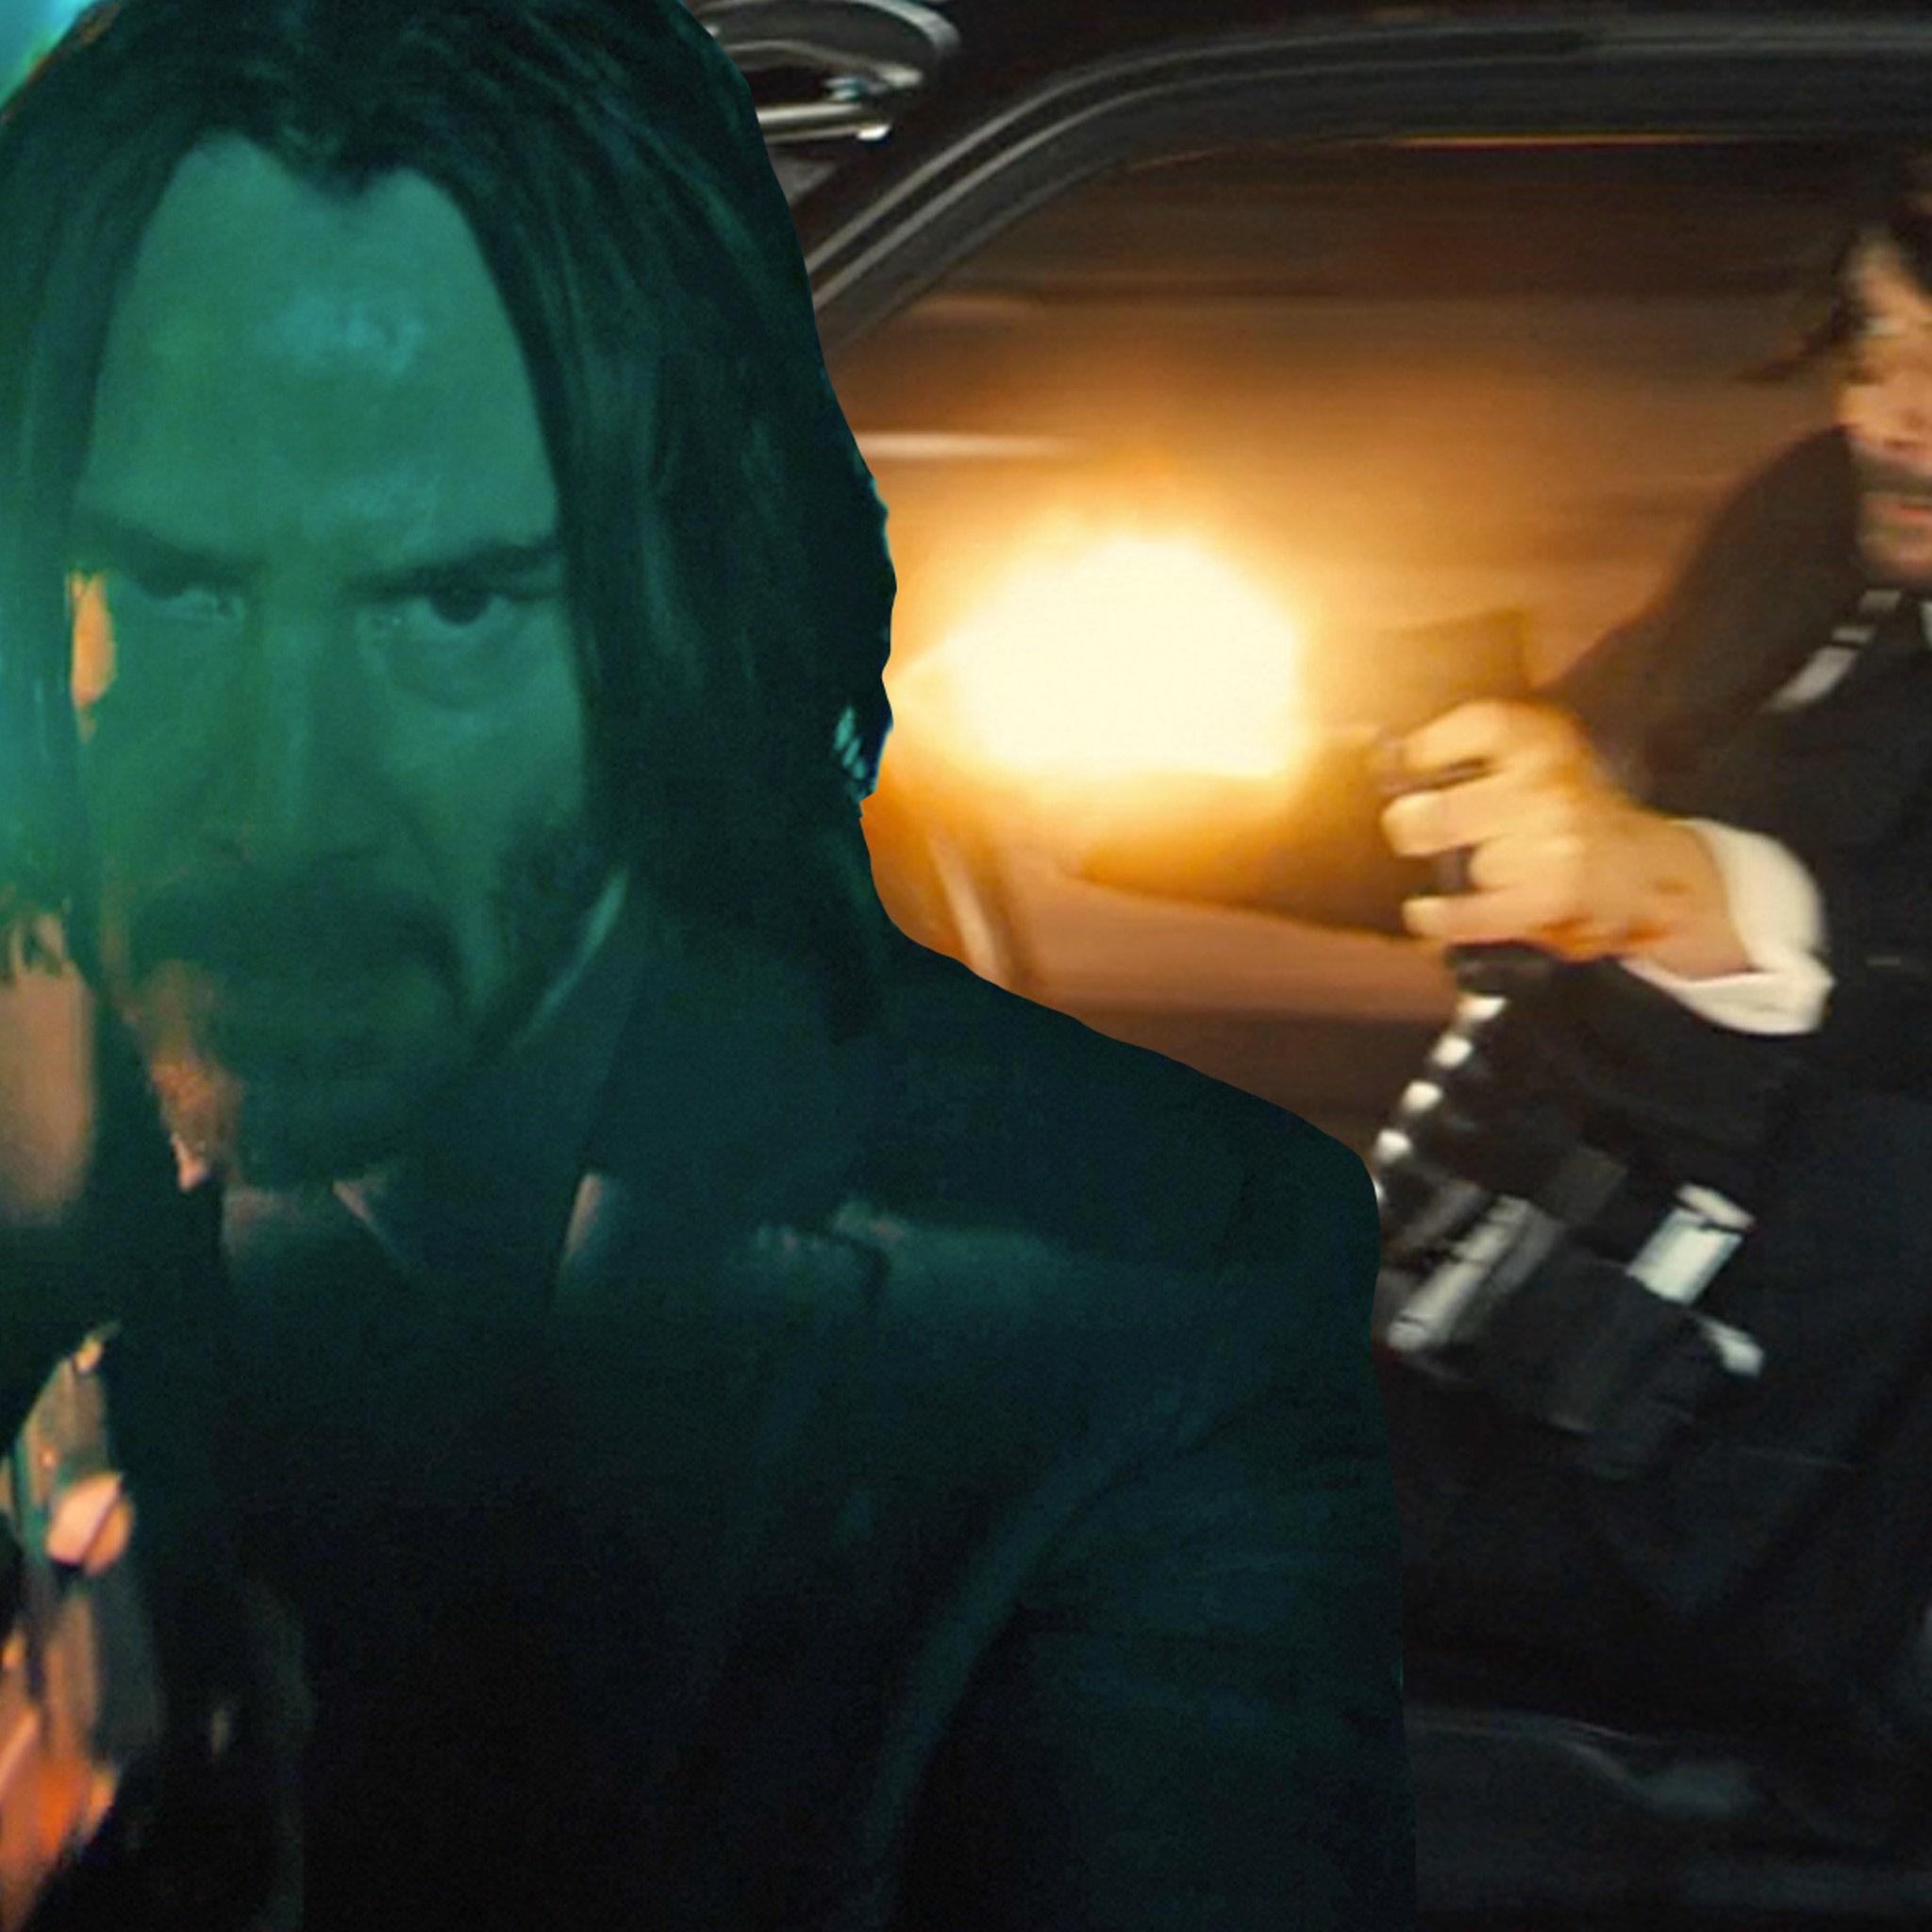 John Wick 4 trailer: Keanu Reeves must duel to death for his freedom. Watch